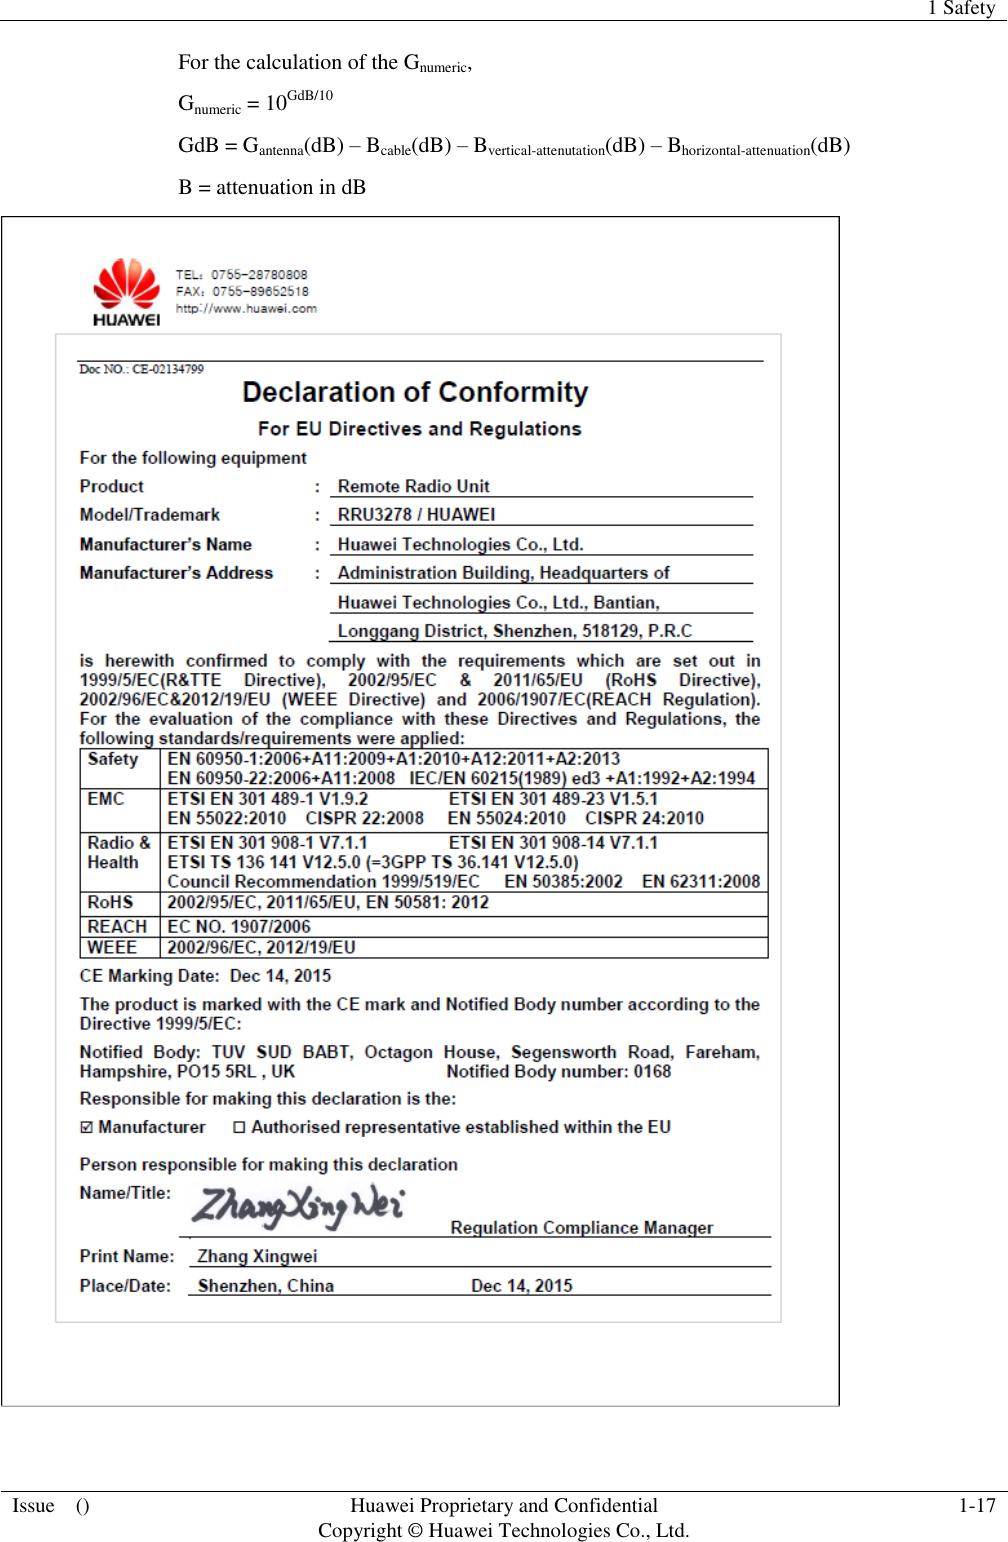   1 Safety  Issue    () Huawei Proprietary and Confidential                                     Copyright © Huawei Technologies Co., Ltd. 1-17  For the calculation of the Gnumeric, Gnumeric = 10GdB/10 GdB = Gantenna(dB) – Bcable(dB) – Bvertical-attenutation(dB) – Bhorizontal-attenuation(dB) B = attenuation in dB  